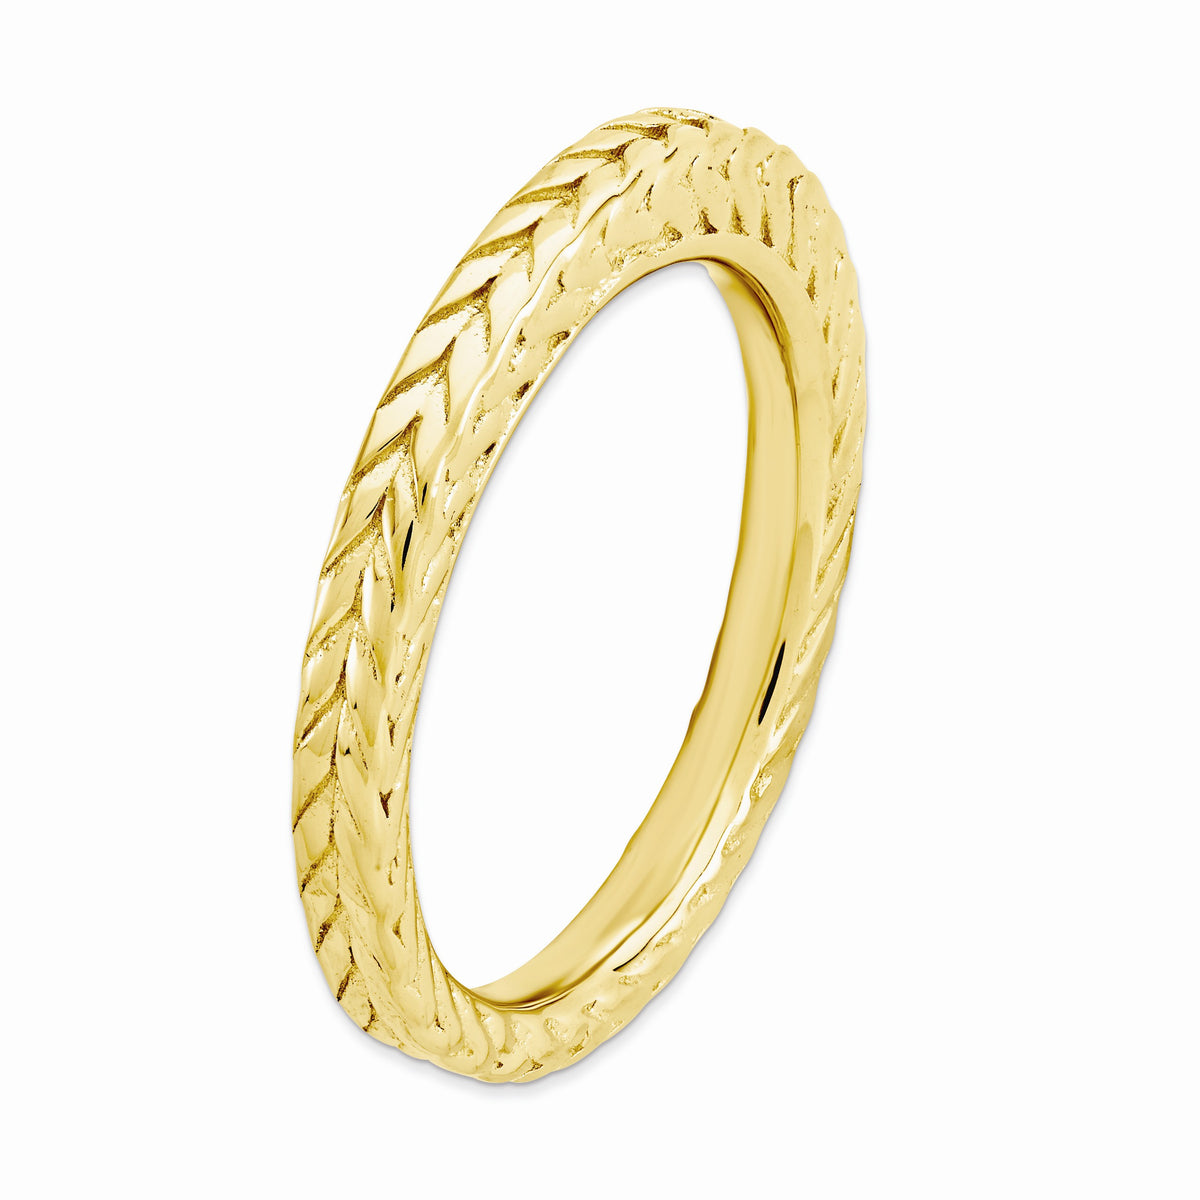 Alternate view of the Stackable 14K Yellow Gold Plated Silver Domed Wheat Design Band by The Black Bow Jewelry Co.